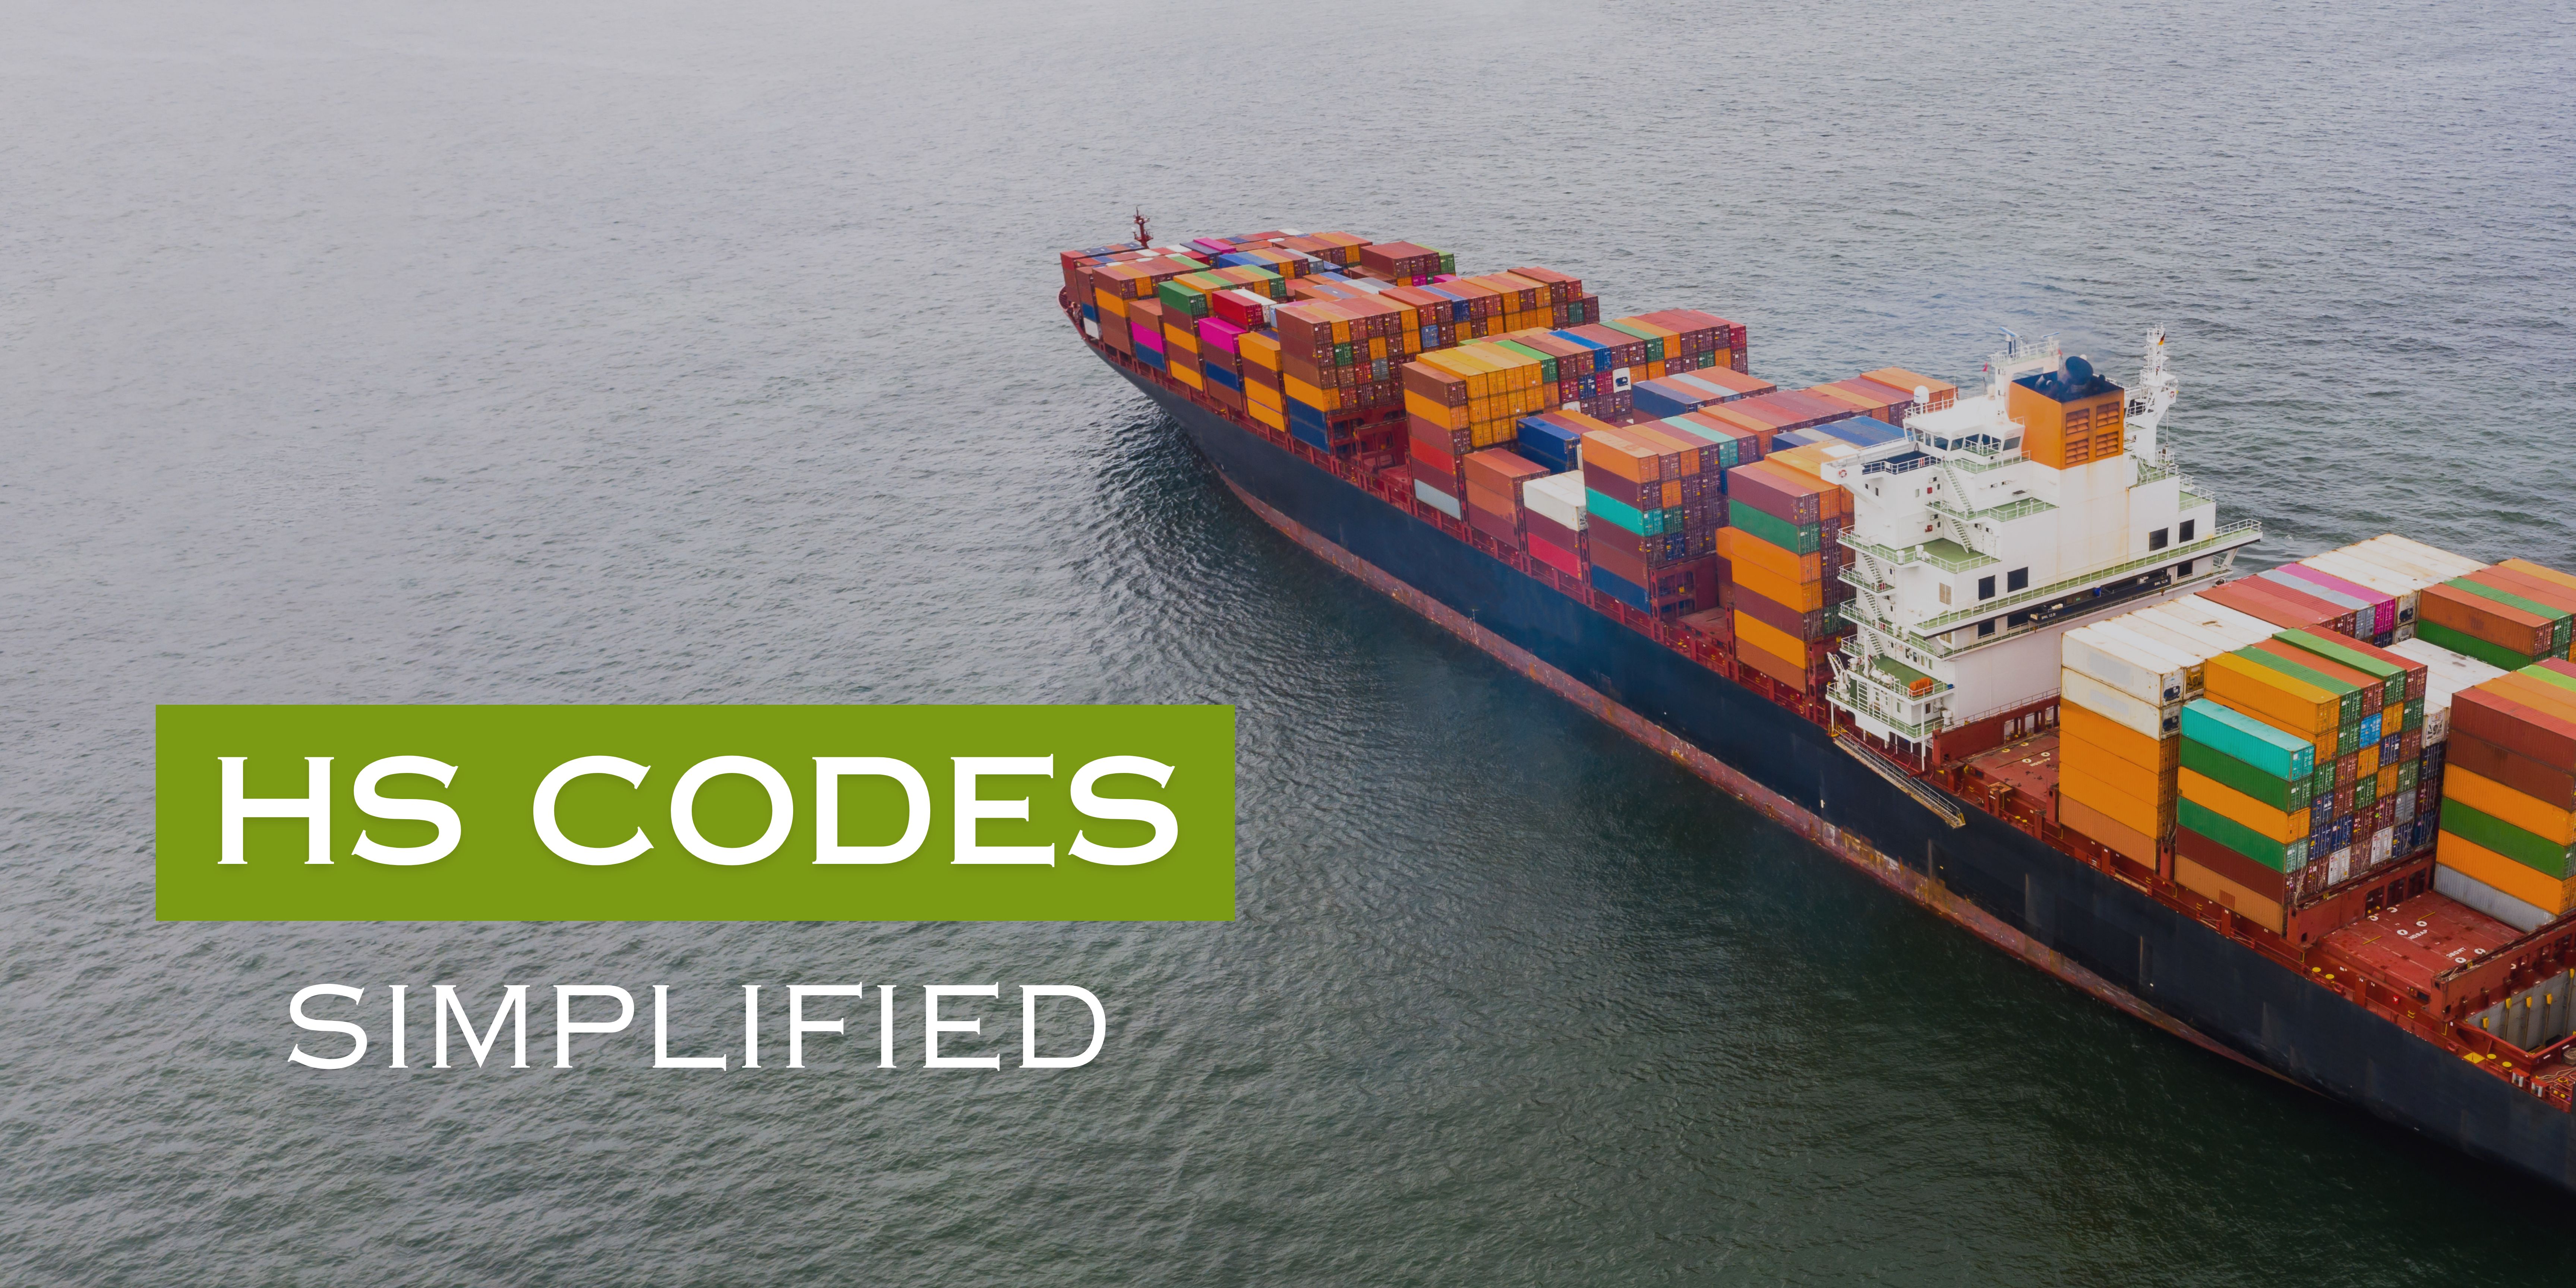 HS Codes simplified by vervo middle east for logistics solutions - a container ship loaded within containers to the uae 